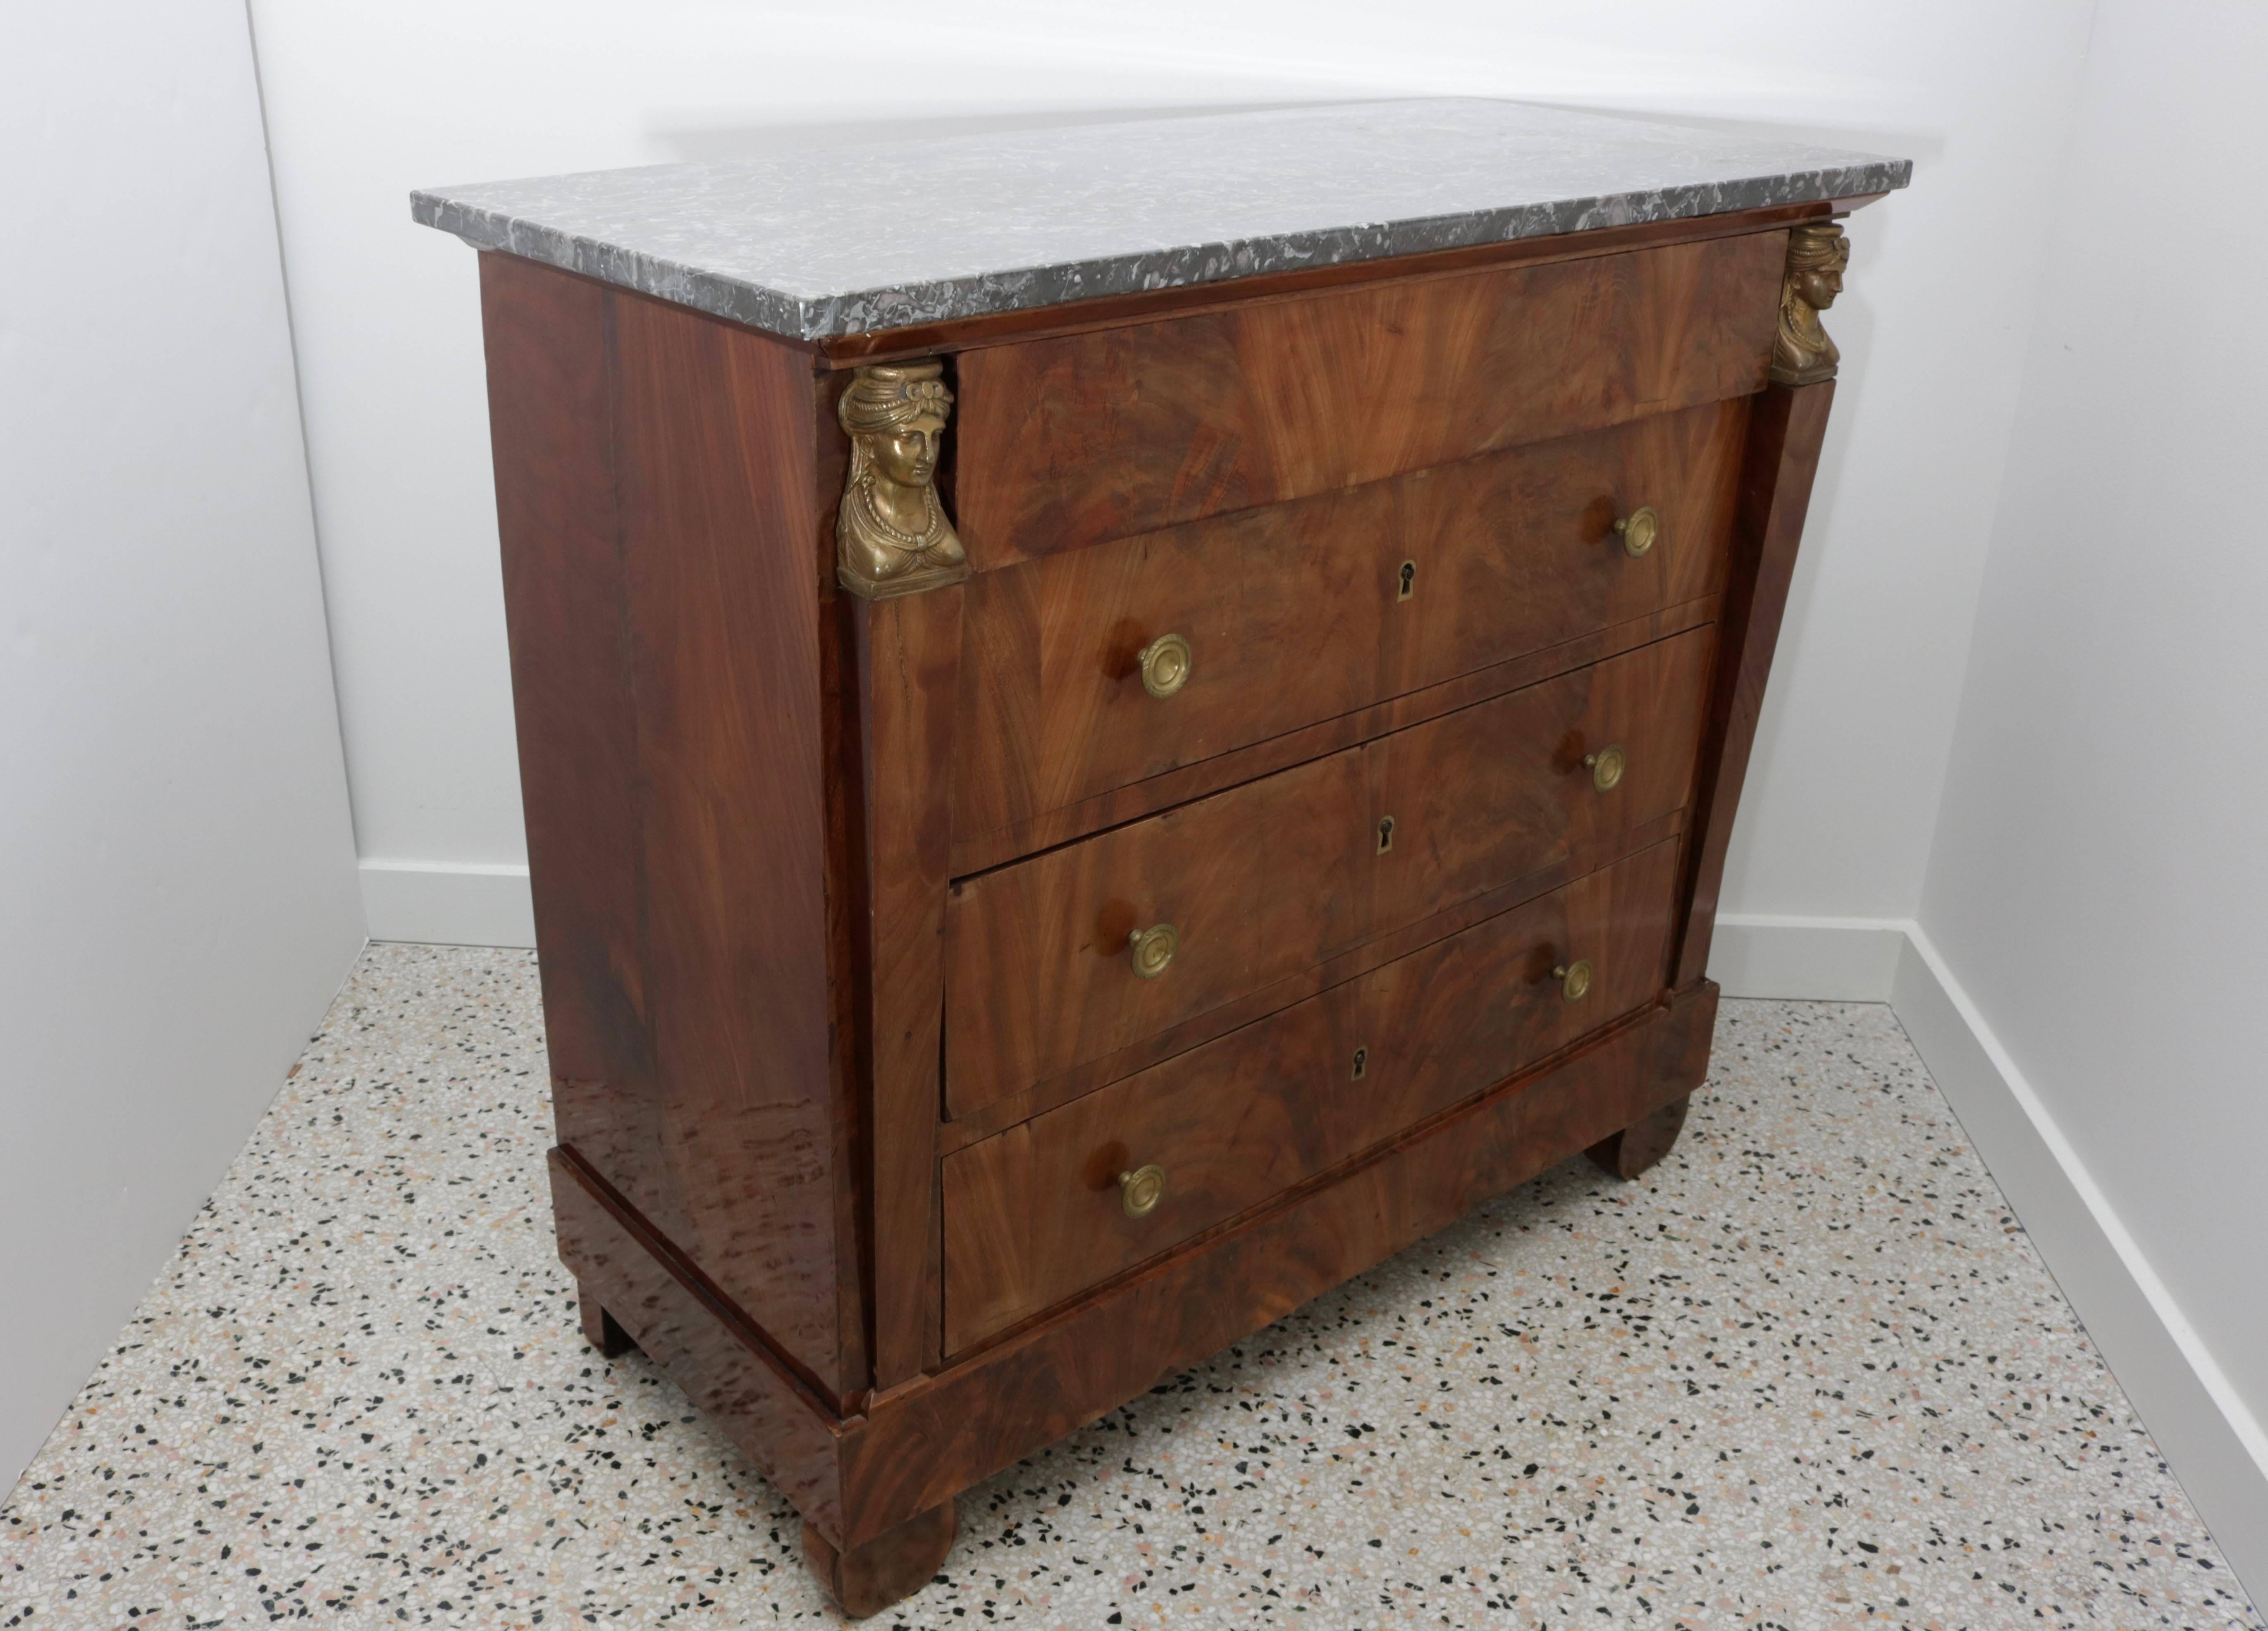 This handsome four-drawer French Empire chest was recently purchased in London and will make the perfect piece for one’s bedroom, library or perhaps foyer. The mahogany wood has a 